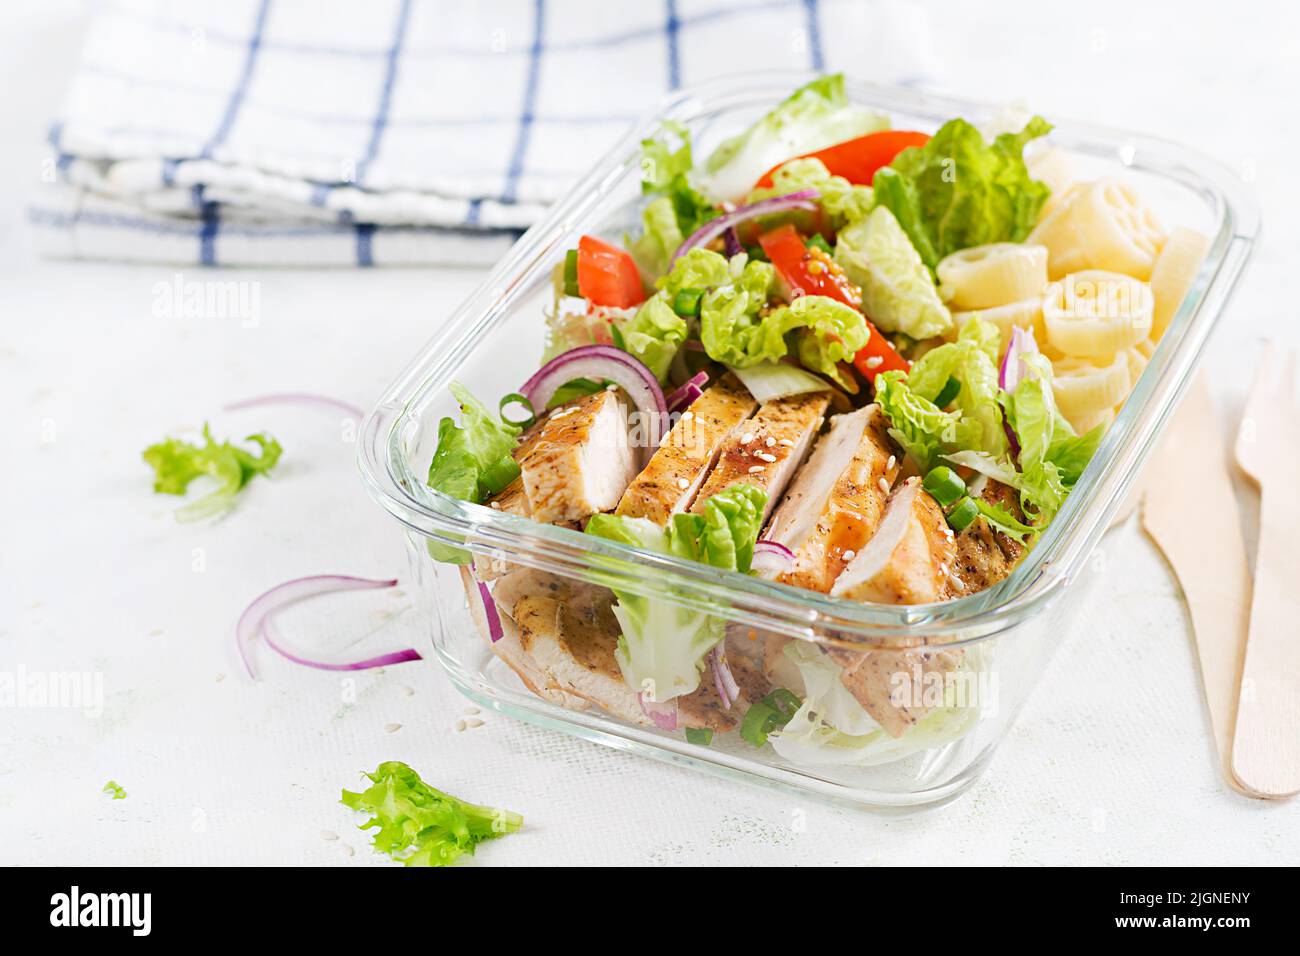 Lunchbox. Lunch box with grilled chicken fillet and pasta salad with fresh vegetables. Stock Photo